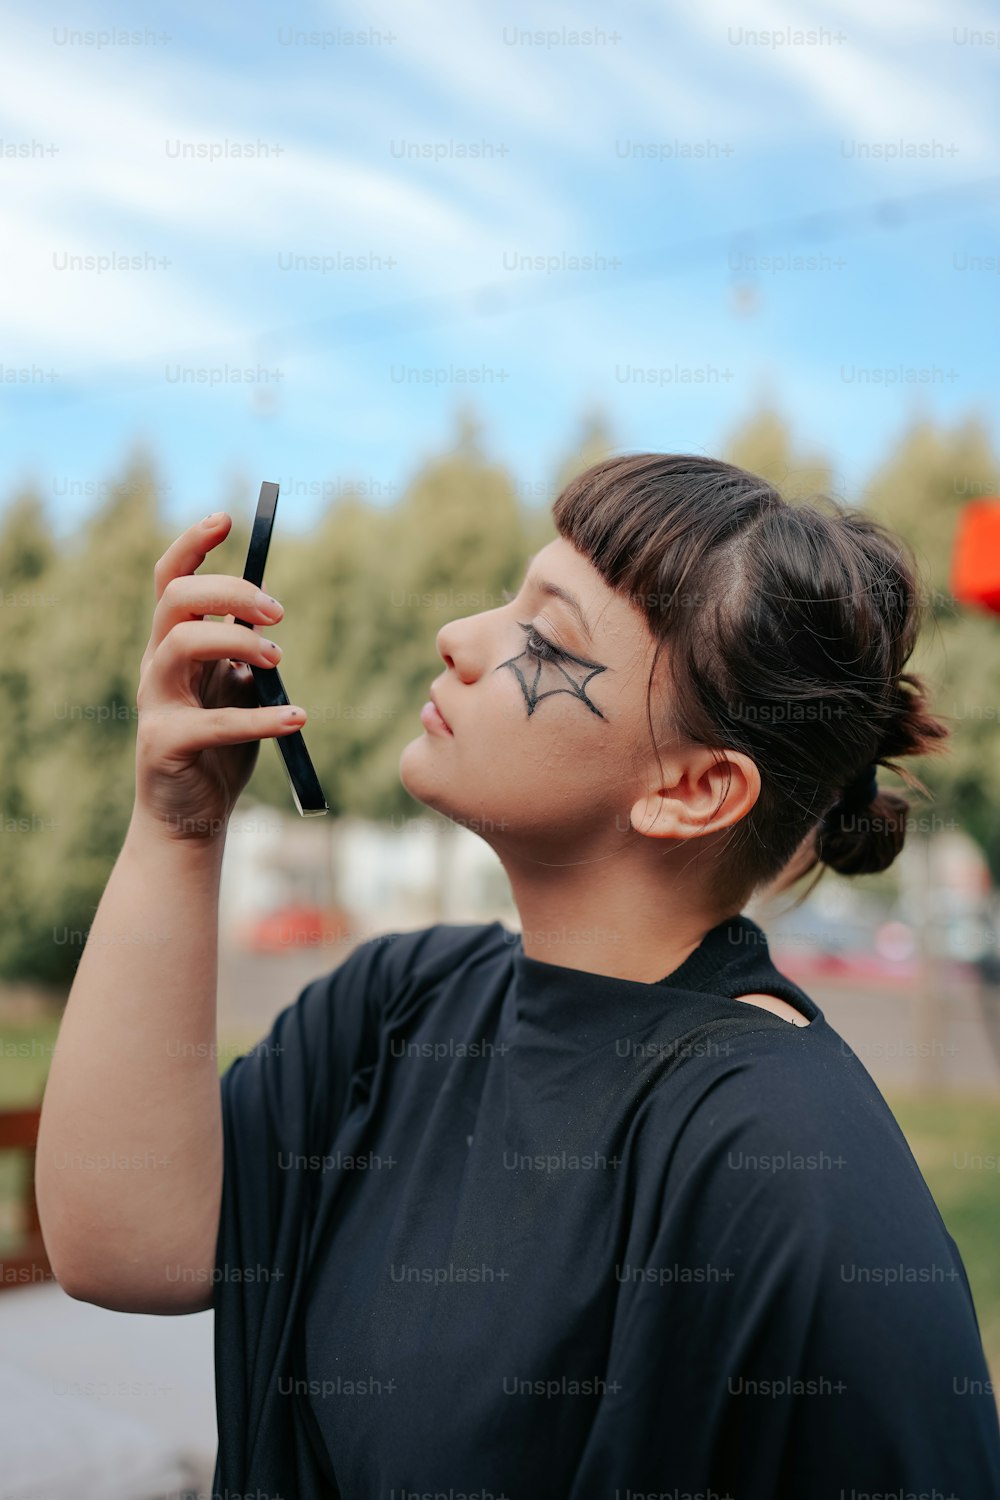 a woman with black makeup holding a cell phone